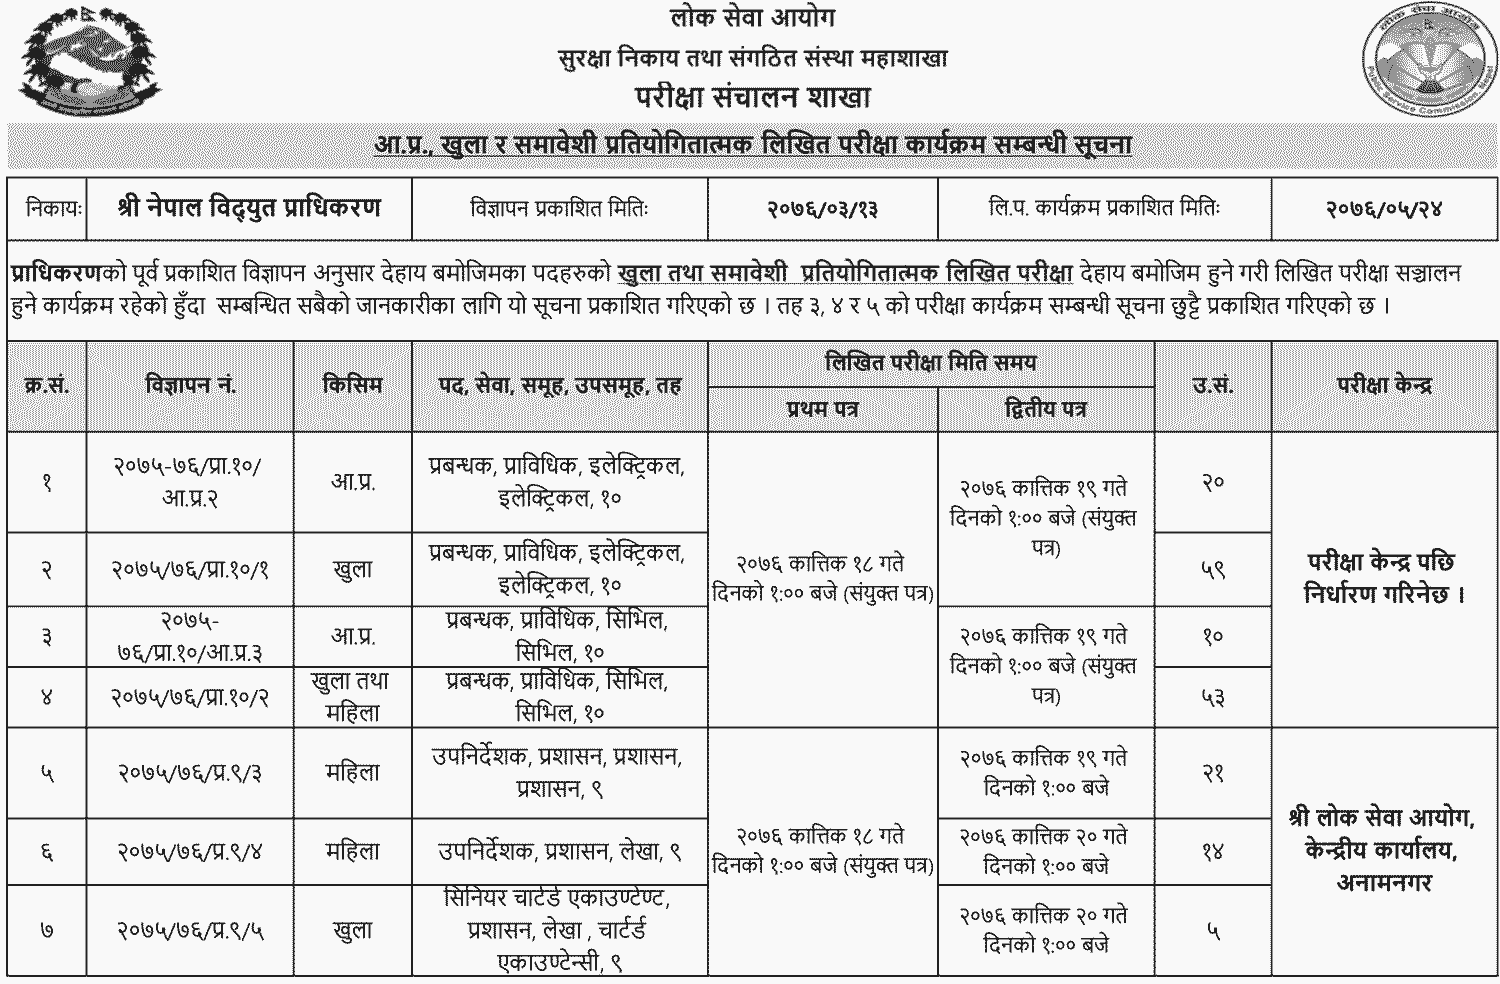 Nepal Electricity Authority Written Exam Routine - Excluding Level 3, 4 and 5